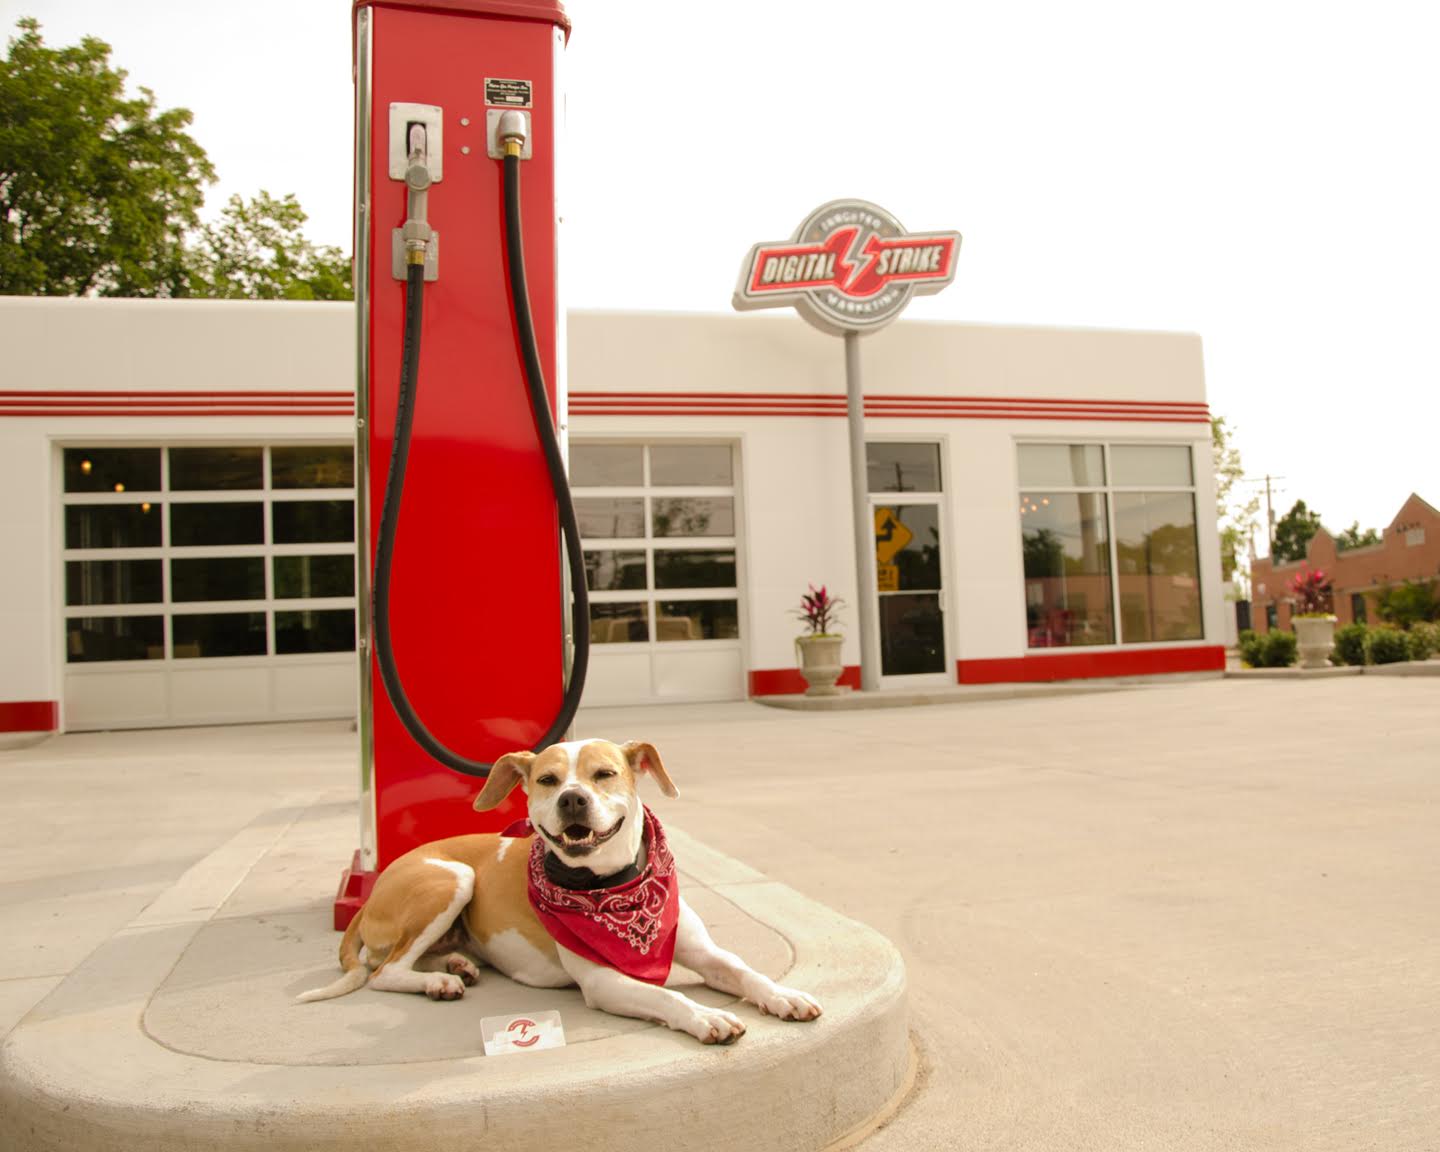 Exterior view of Digital Strike- Targeted Marketing office building with dog